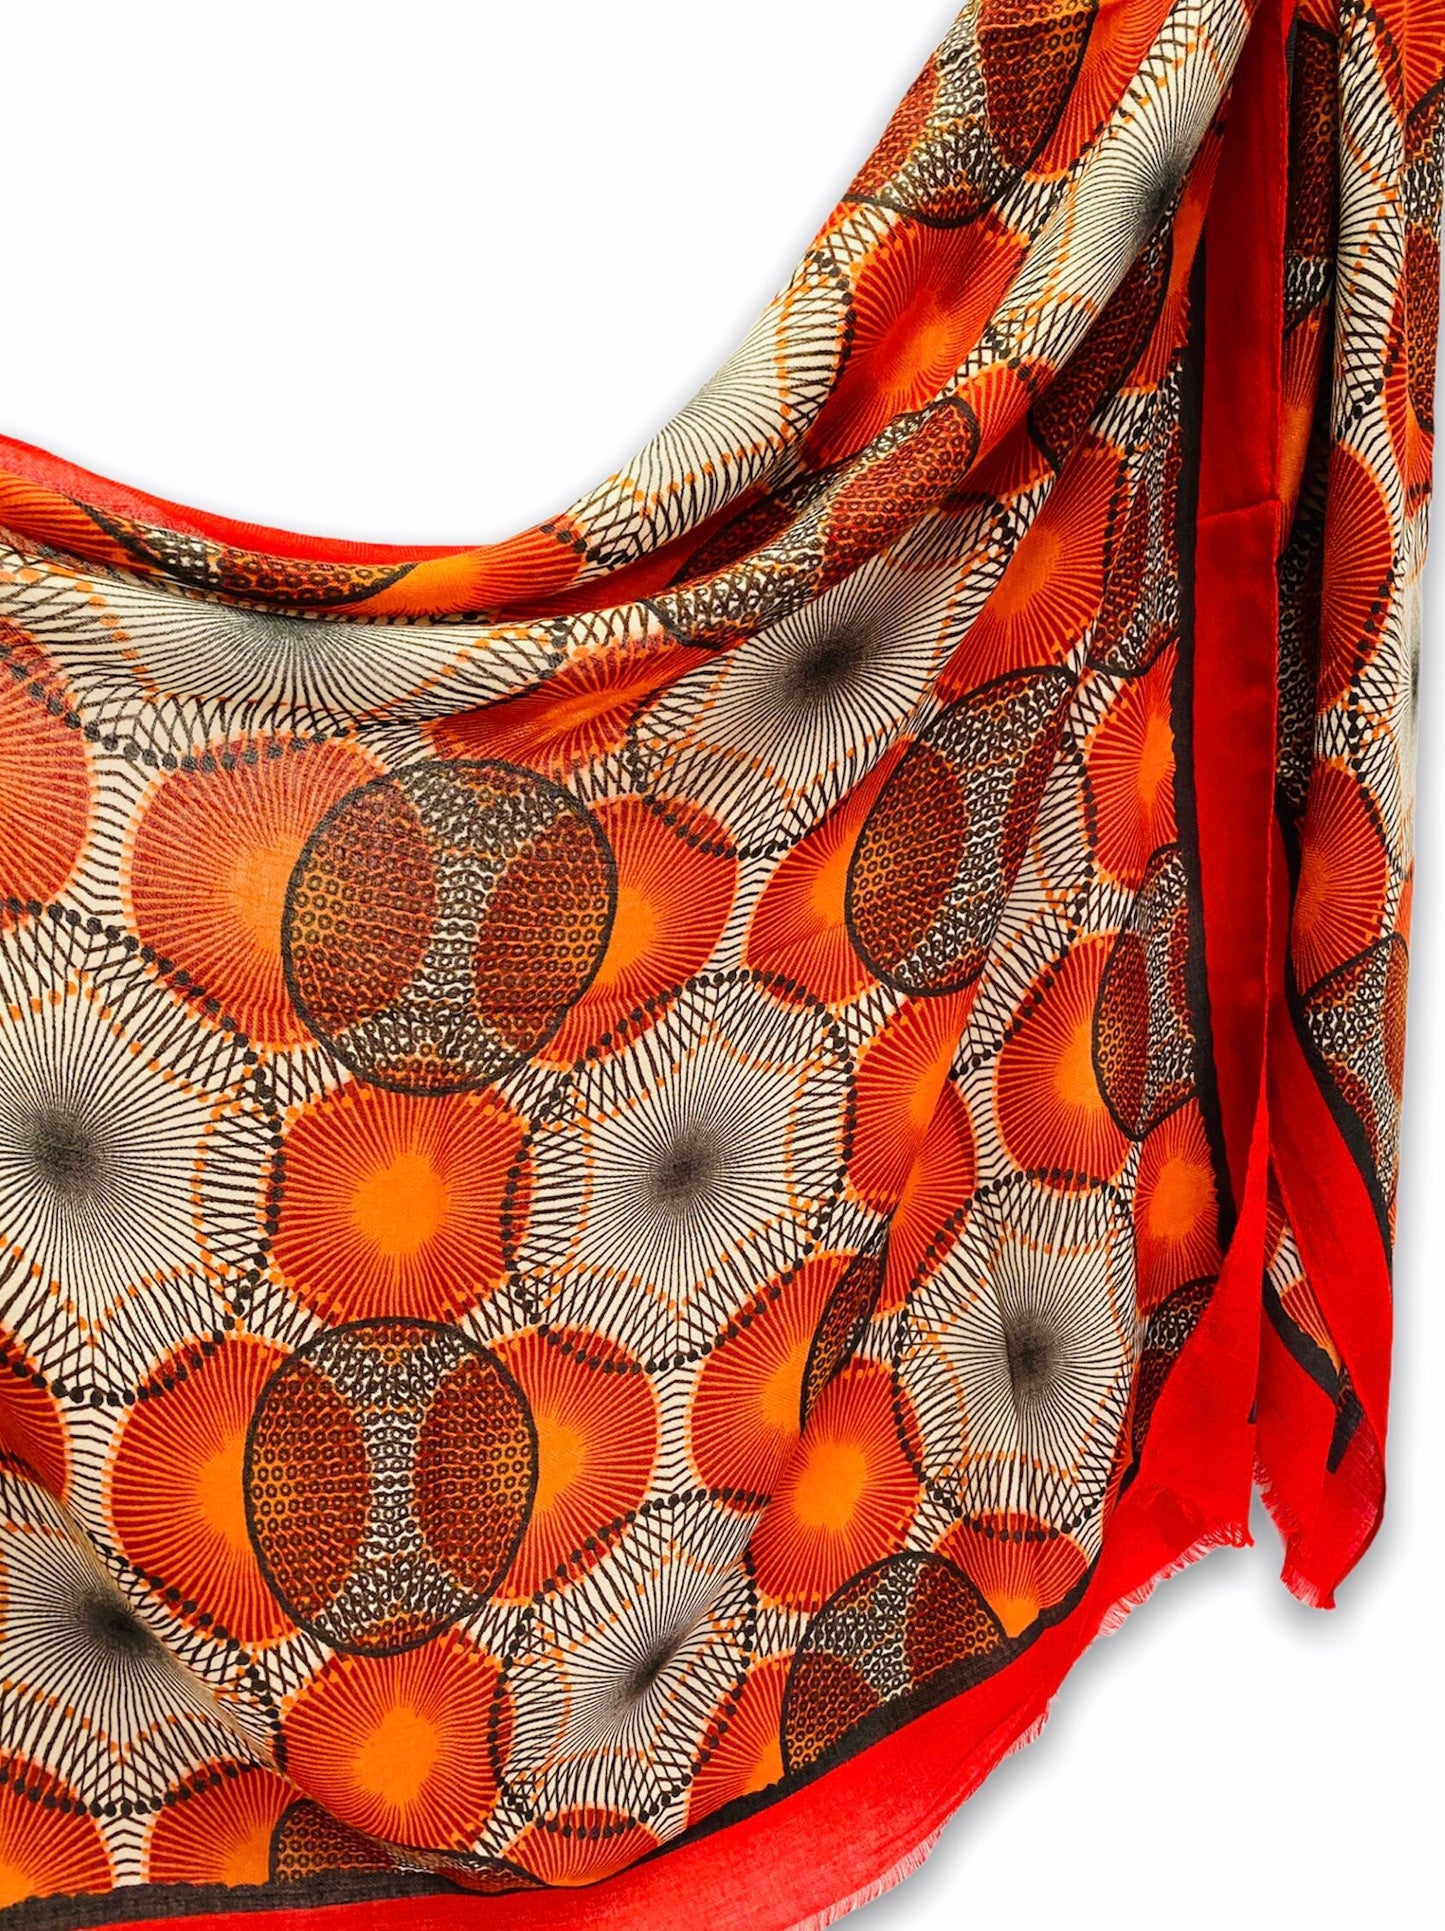 Circle Fan Pattern Orange Cotton Scarf/Scarf Women/Spring Summer Scarf/Gifts For Her/Gifts For Mum/Birthday Christmas Gifts